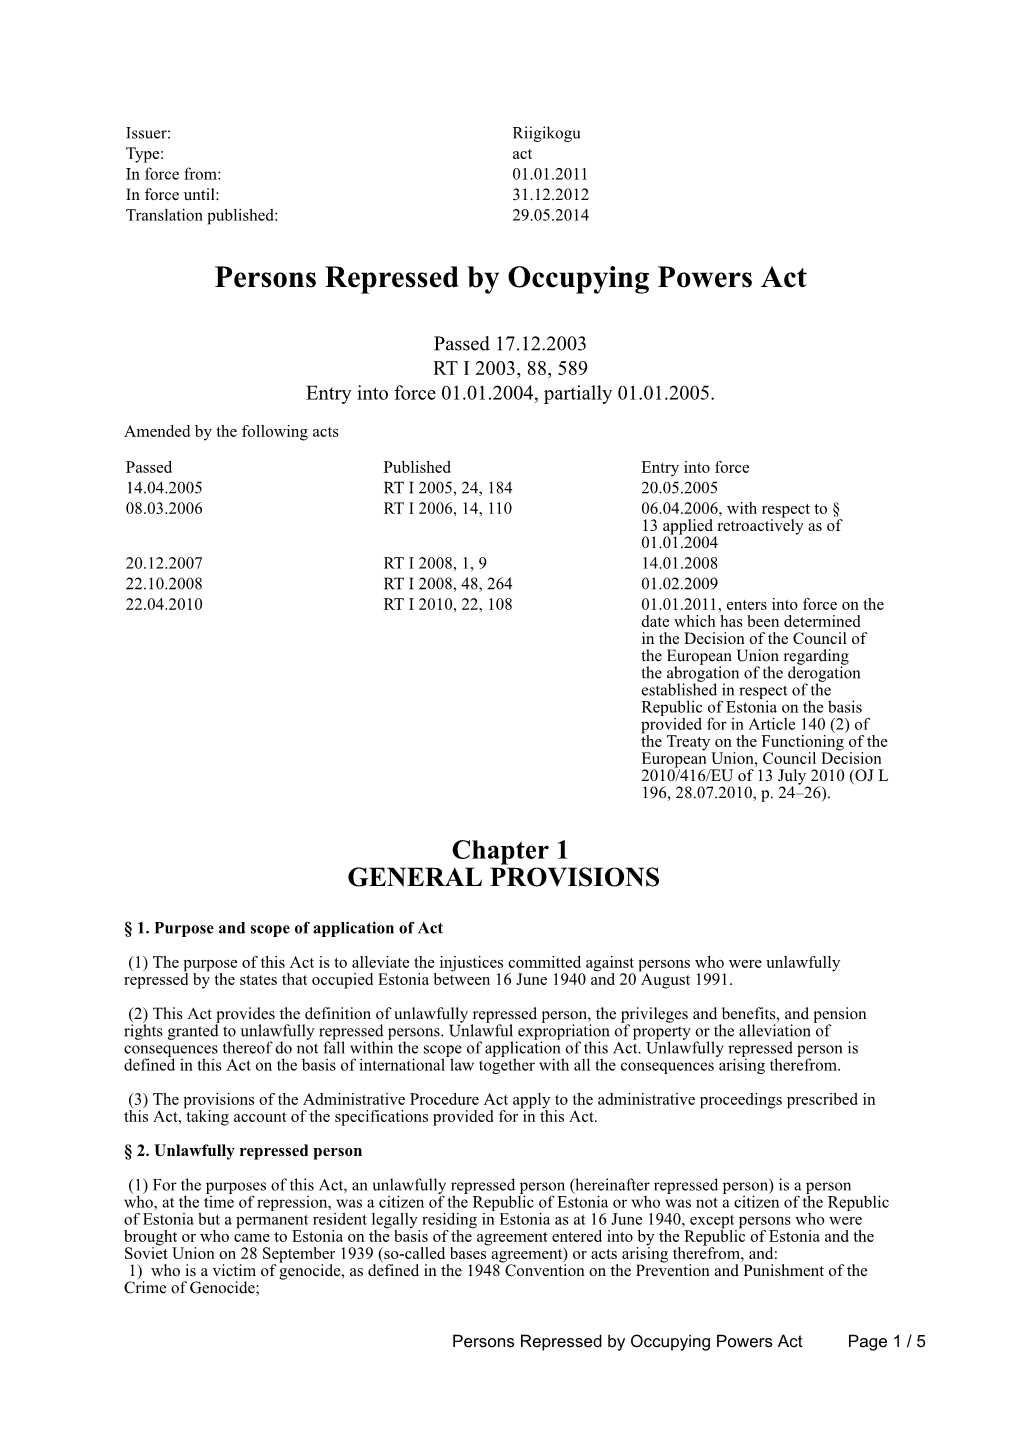 Persons Repressed by Occupying Powers Act